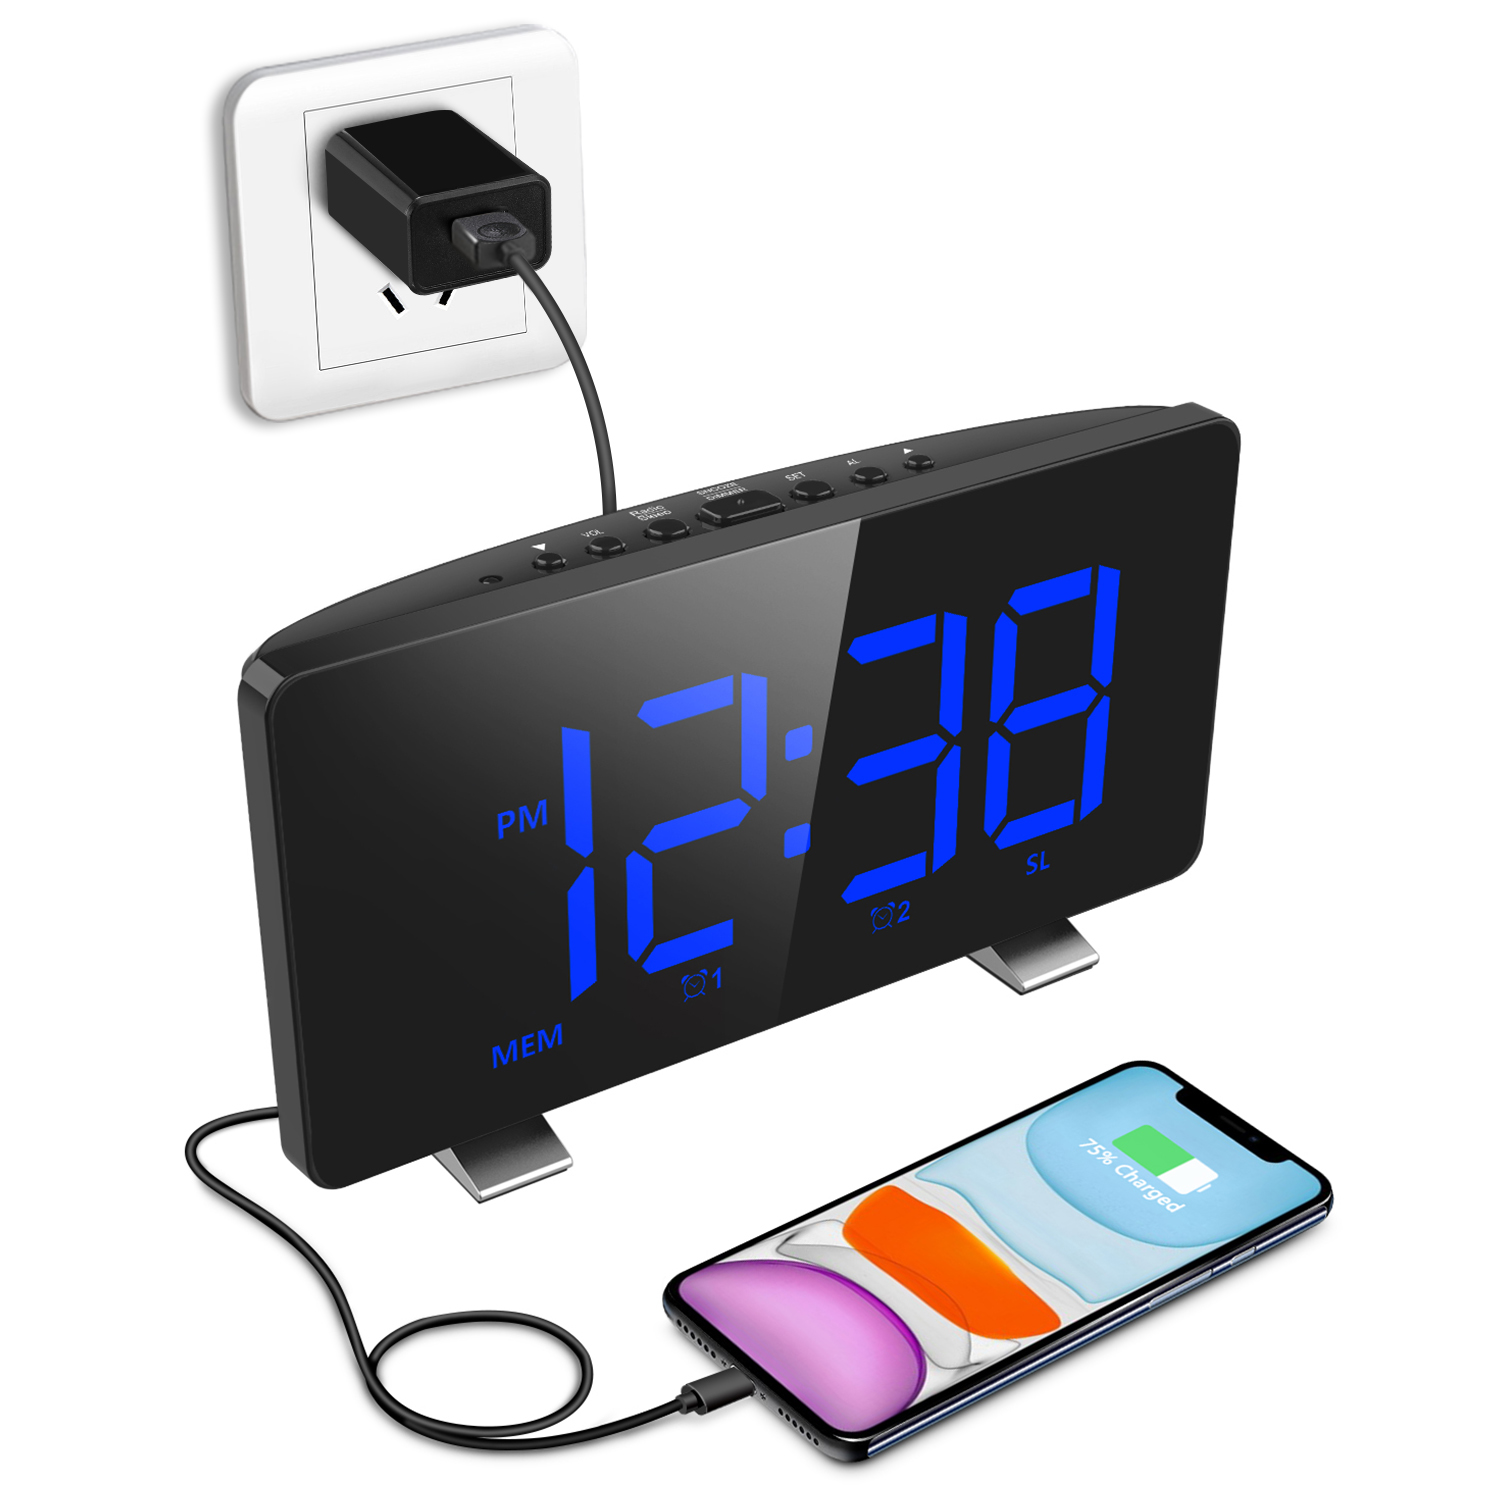 REACHER Projection Alarm Clock with Dual Alarm USB 0-100 Dimmer and Snooze Time 